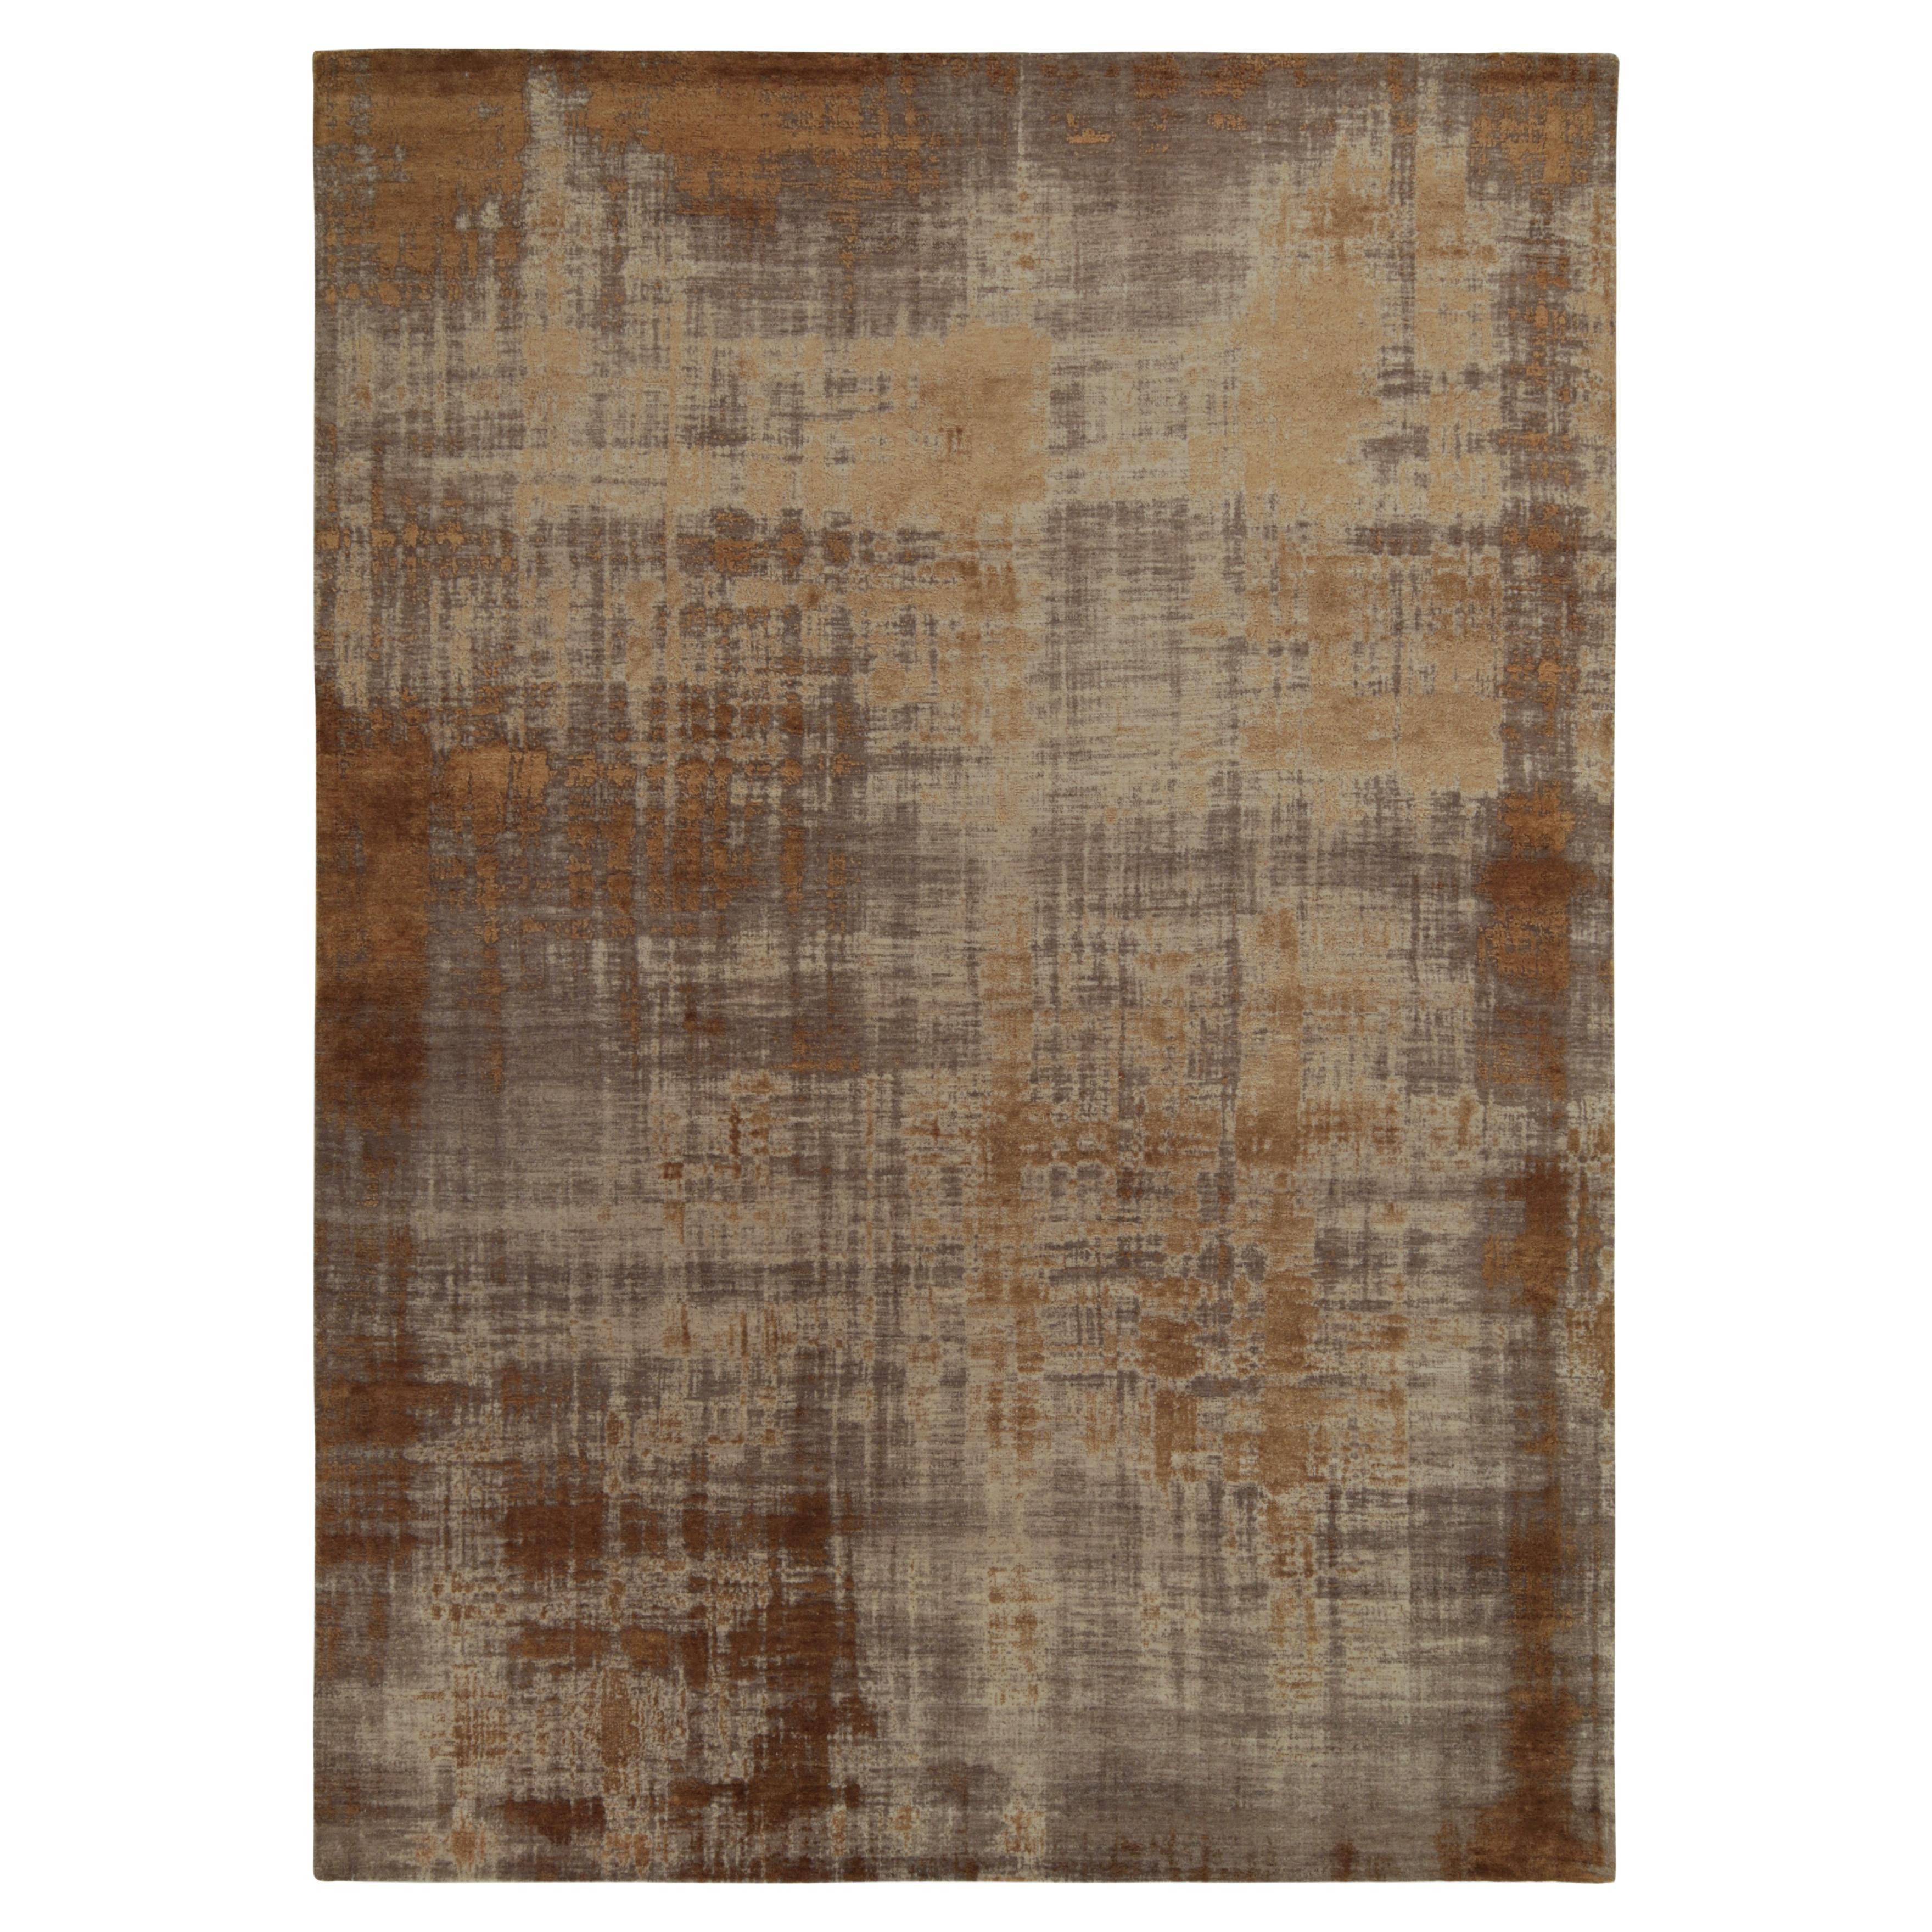 Rug & Kilim’s Abstract Rug in Copper-Brown, Gold and Grey All over Pattern For Sale